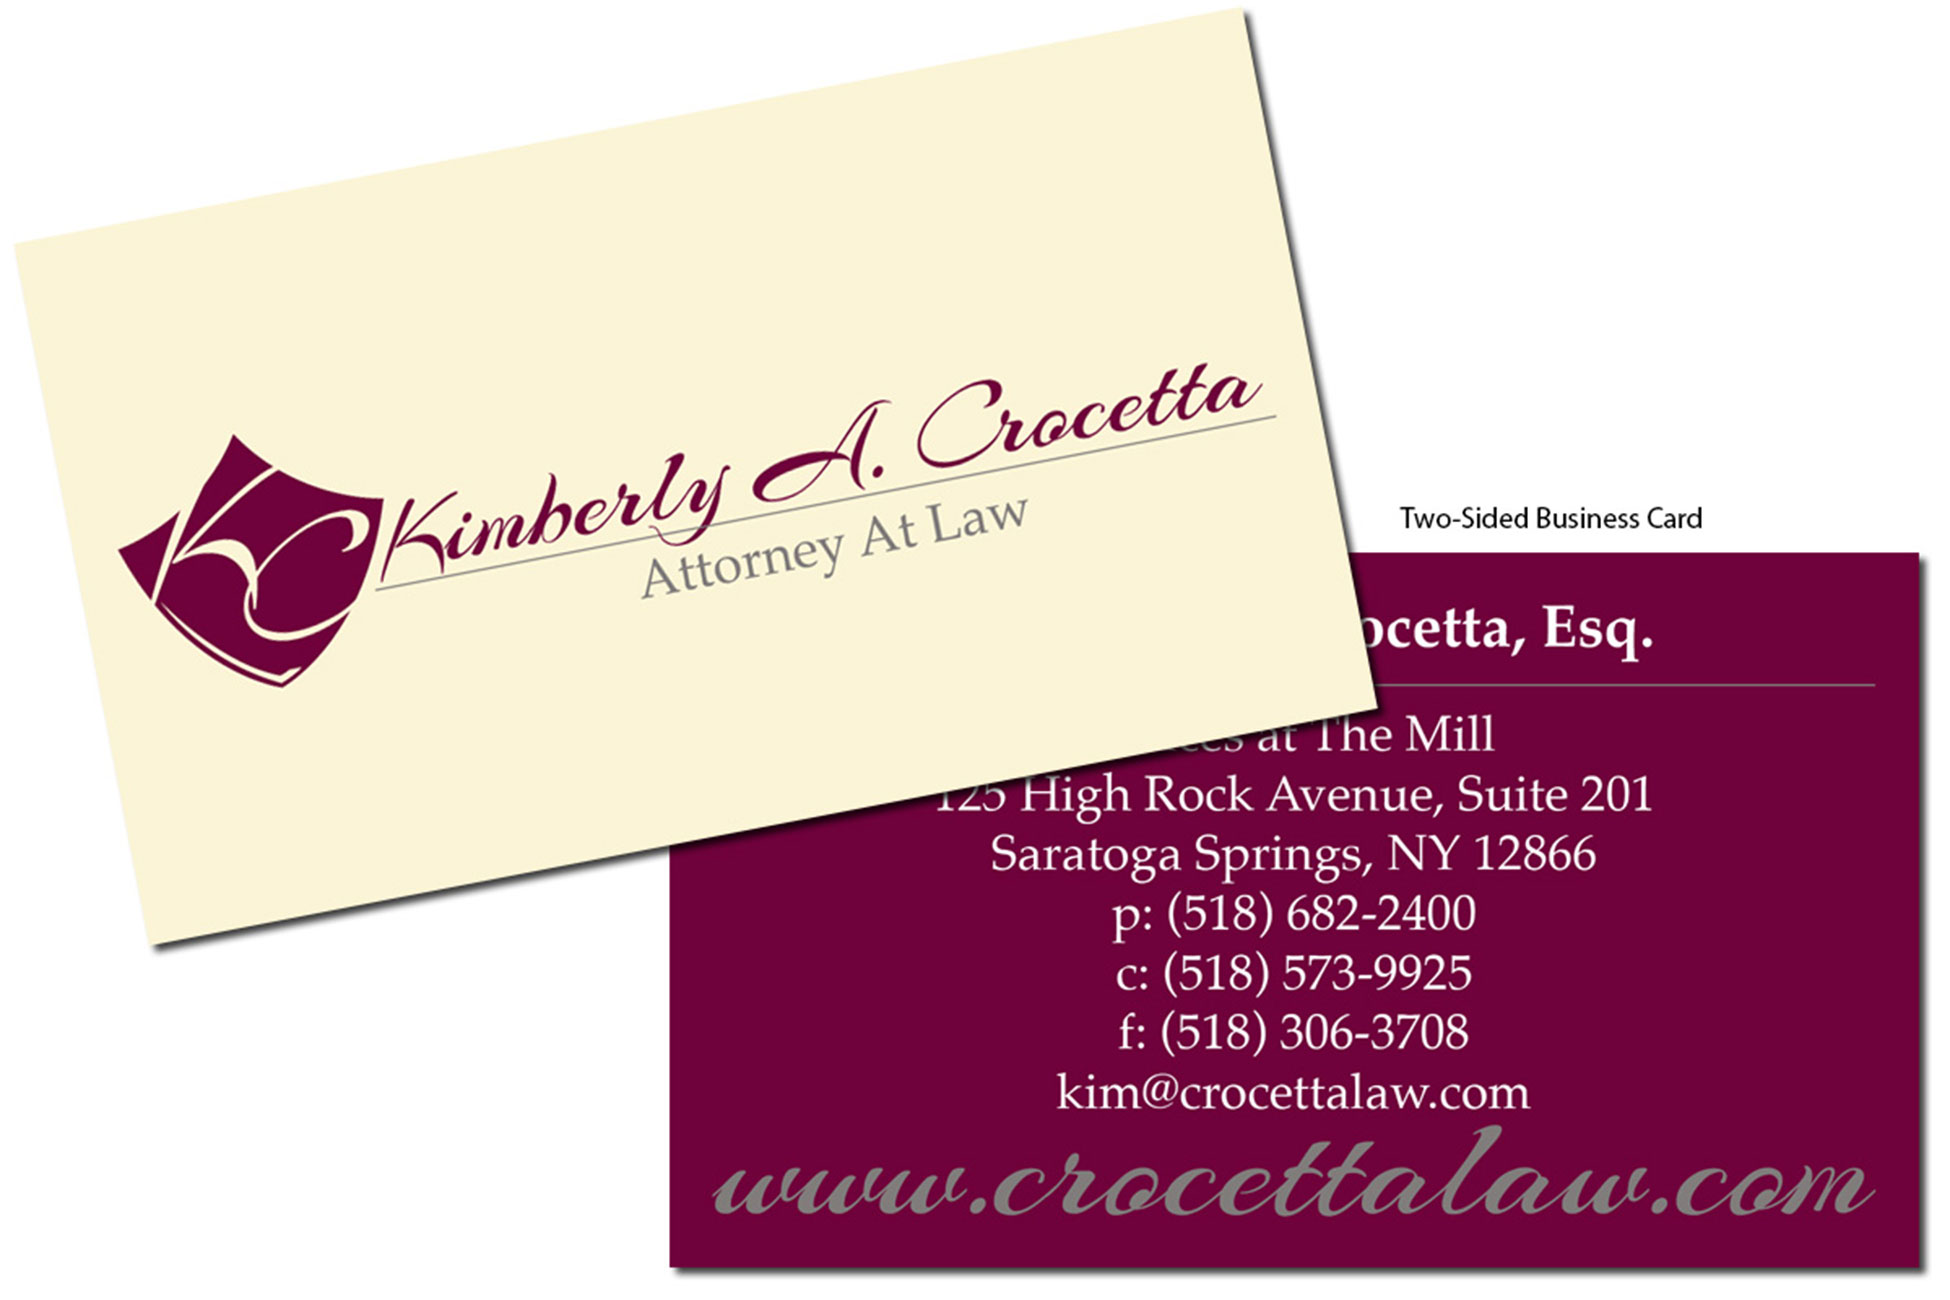 Image of business card front and back created for Kimberly A. Crocetta Attorney at Law in Saratoga Springs, New York.